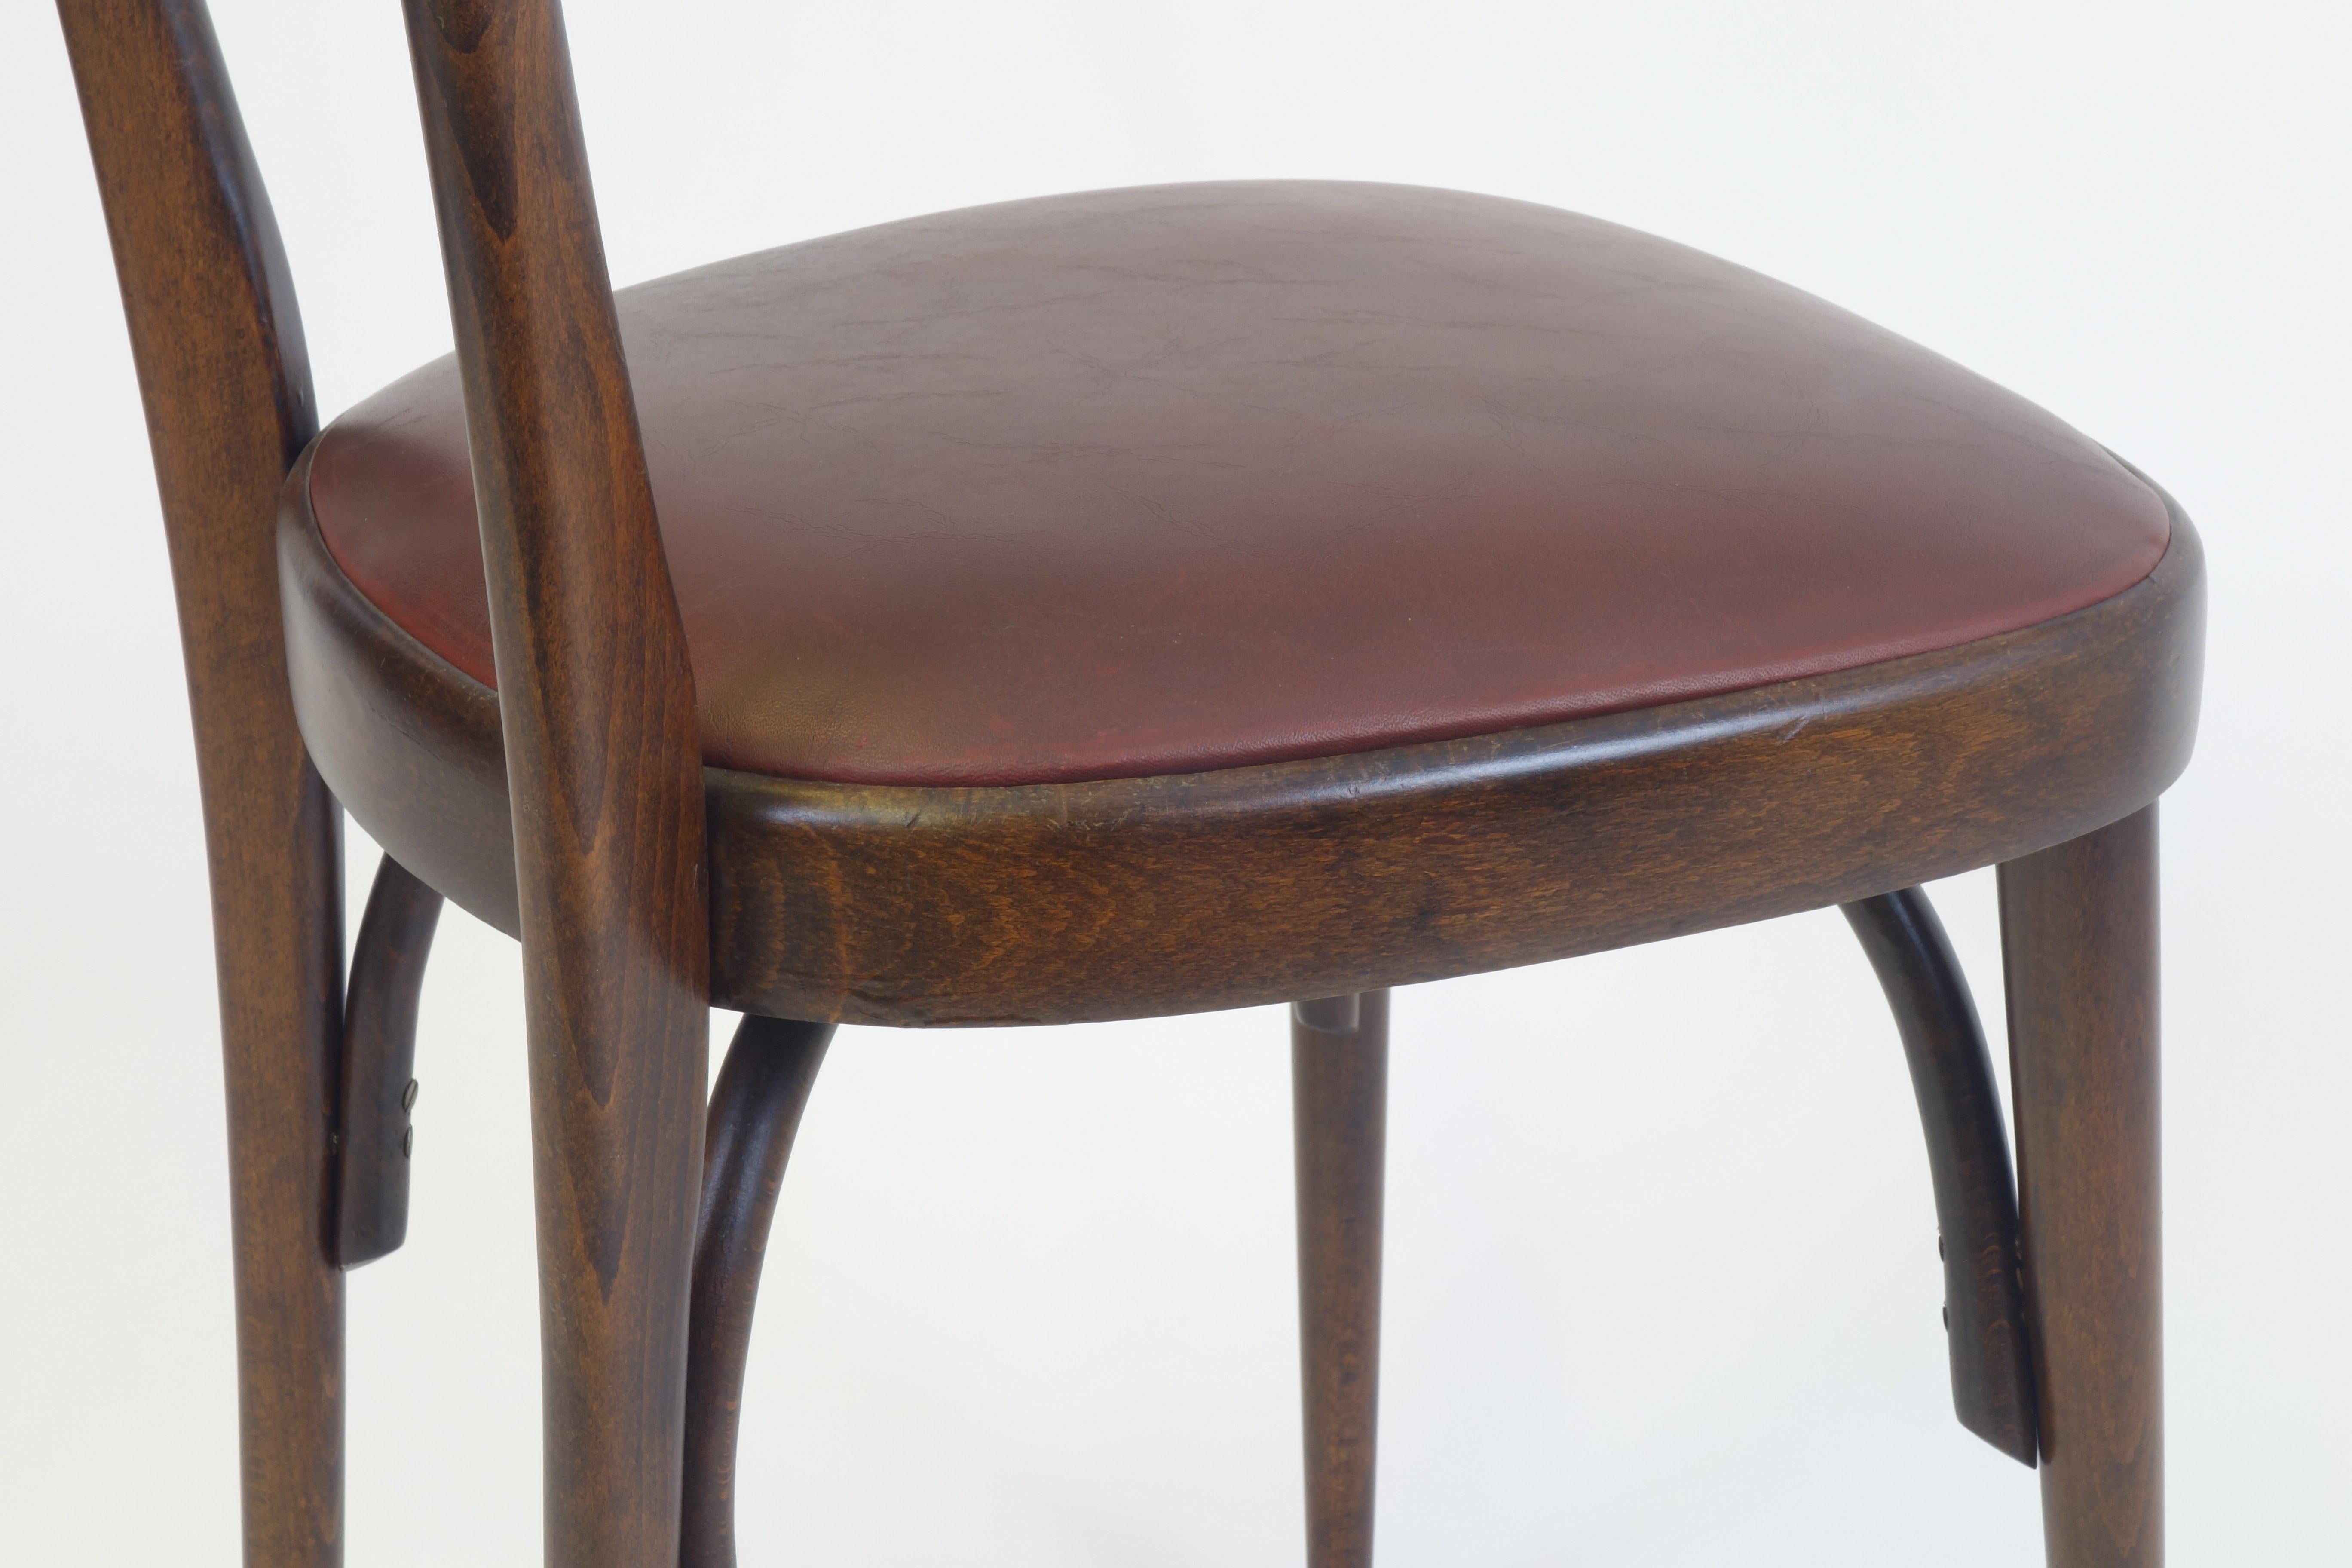 4 smart dining chairs conveying the understated eccentric mood of the famous Italian Cantú-style, very reminiscent of the design by Ico Parisi. These remarkable objects are in their original pure and unrestored condition still with the original